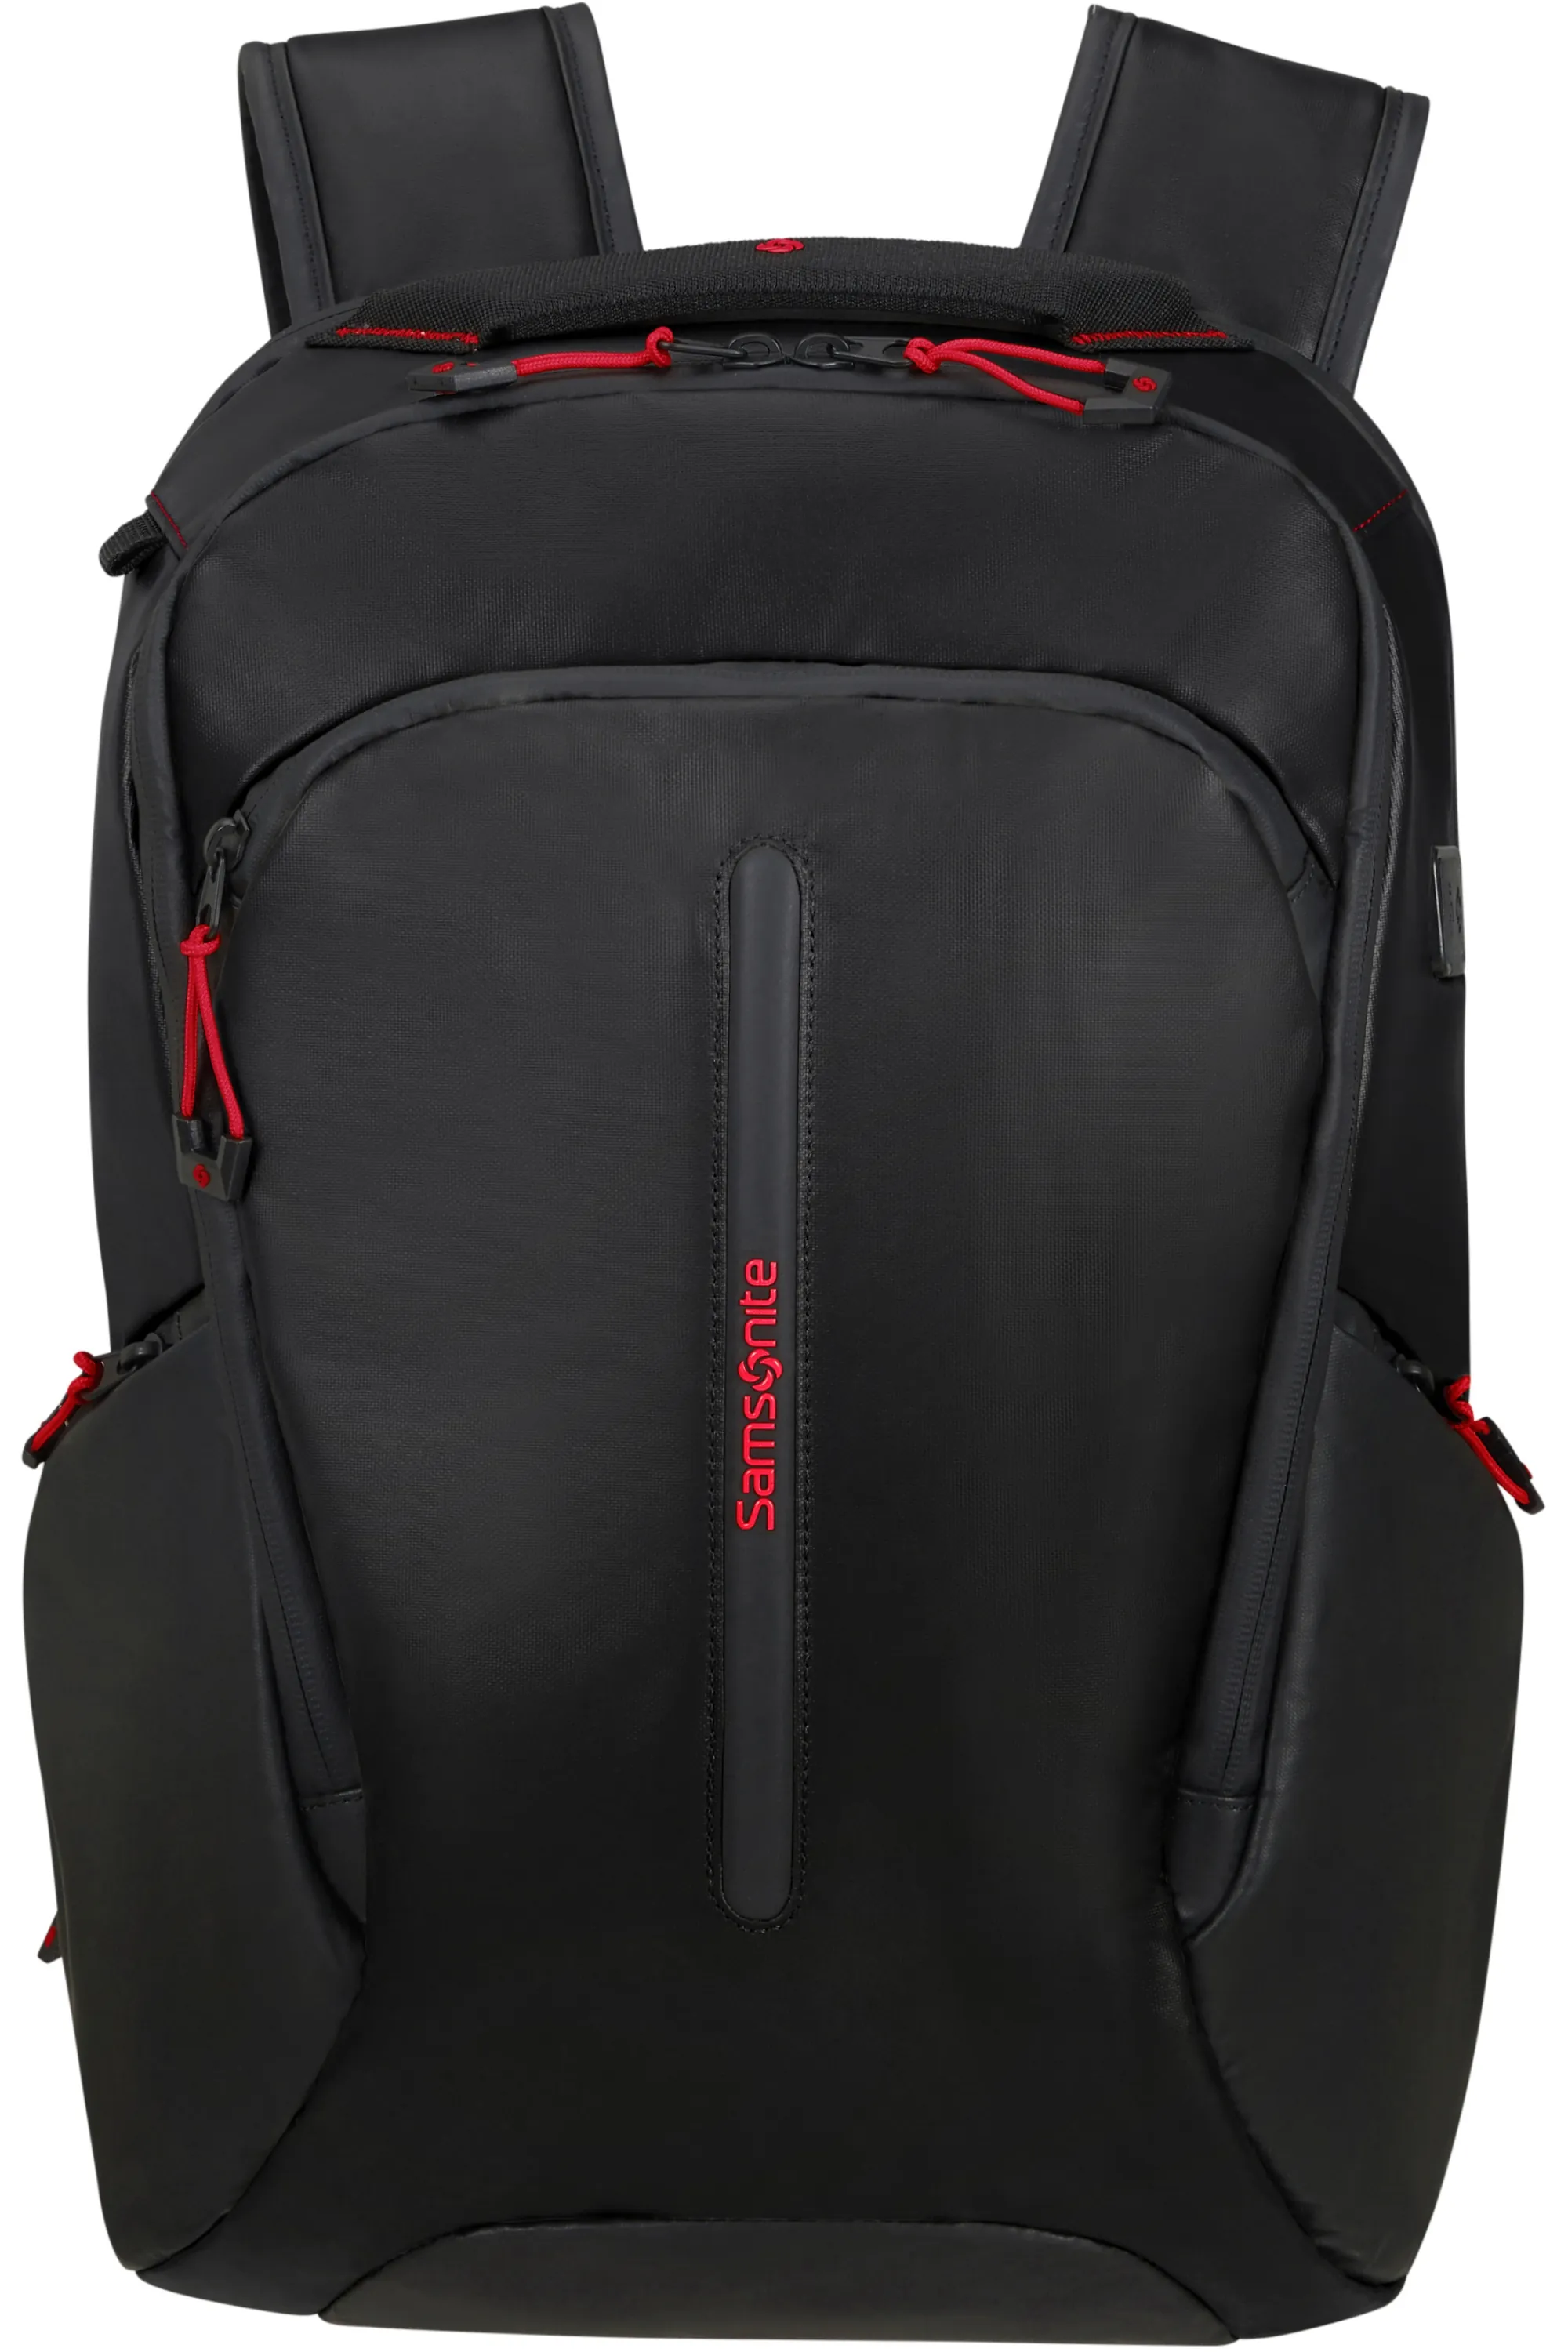 140874-1041-140874_1041_ecodiver_urban_lap-_backpack_m_usb_front-6fa47754-0ce6-42e9-9be2-ae6d00b5a2d2-png